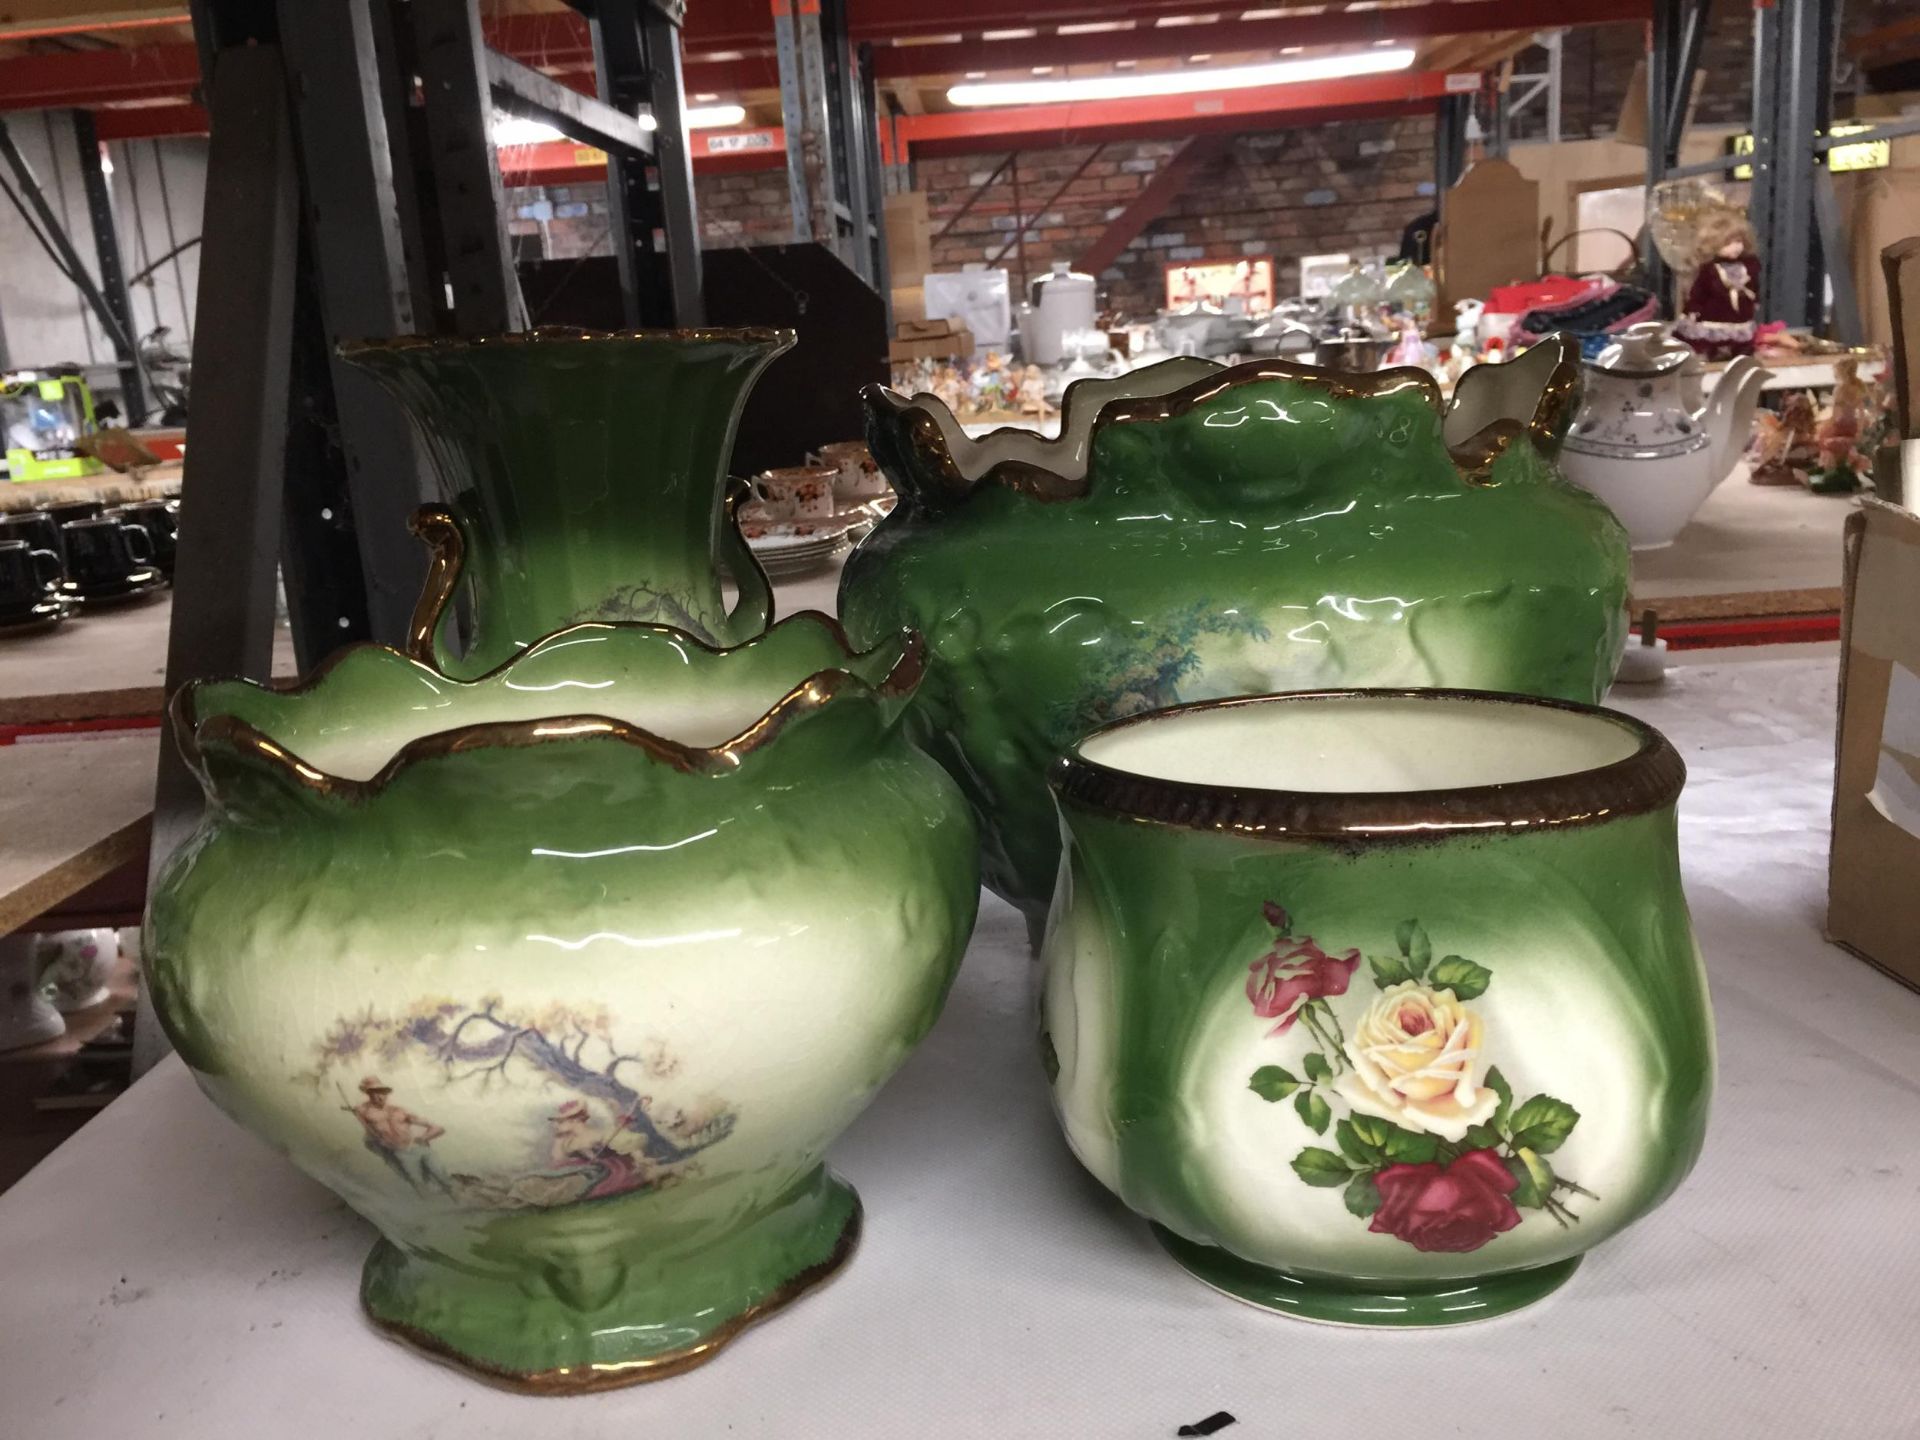 A GROUP OF FOUR VINTAGE POTTERY ITEMS, TWO PLANTERS, VASE AND A POT